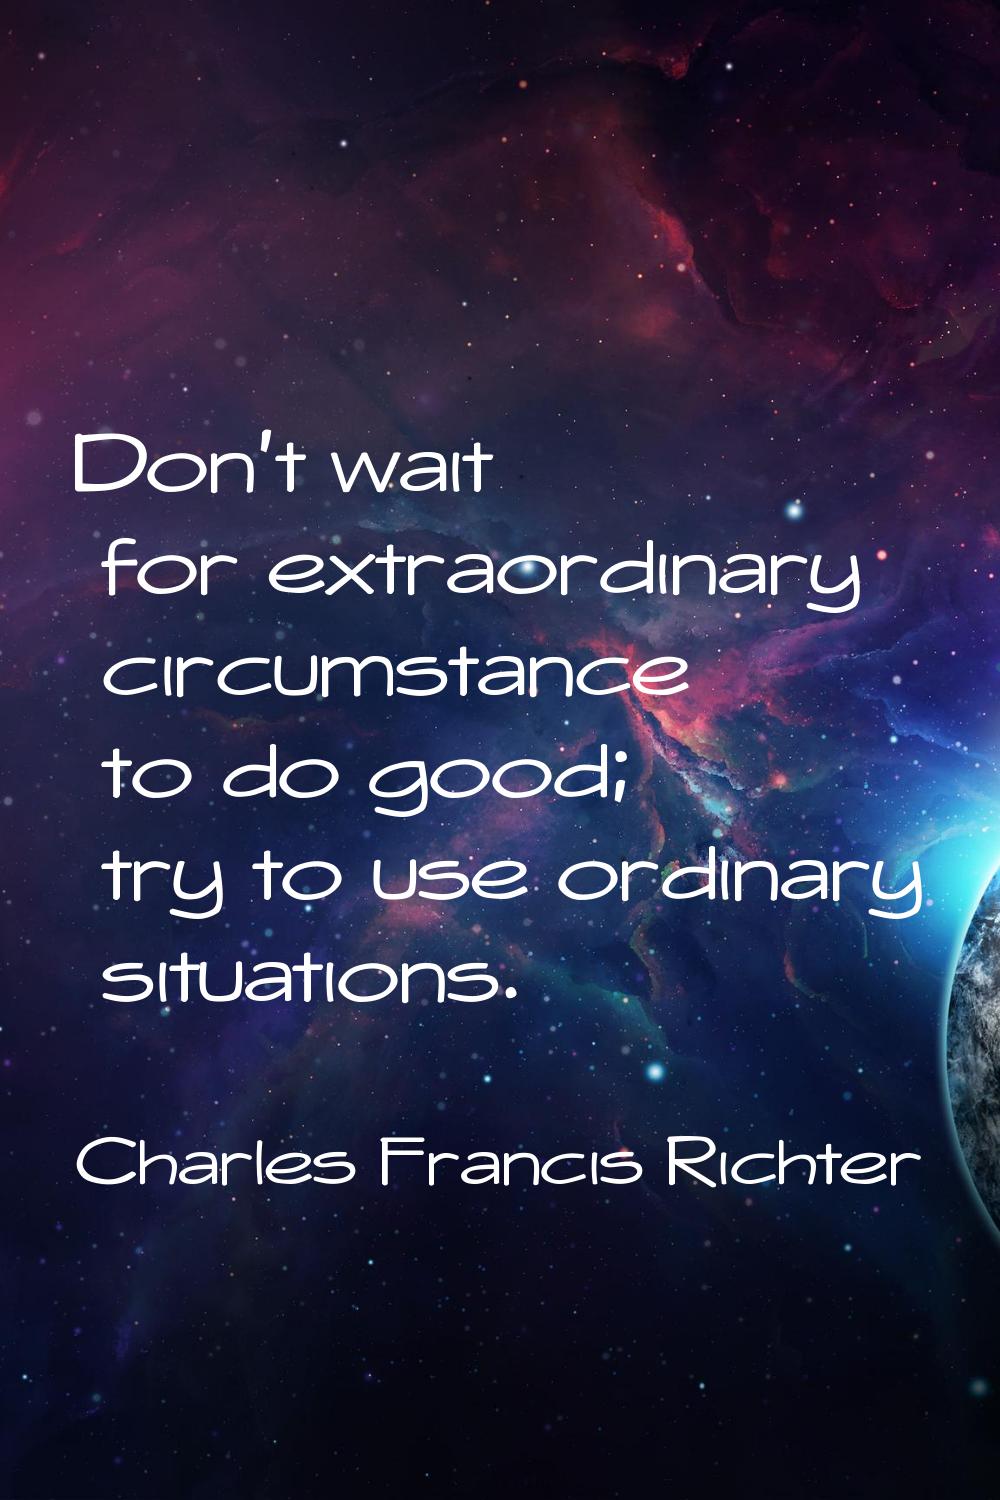 Don't wait for extraordinary circumstance to do good; try to use ordinary situations.